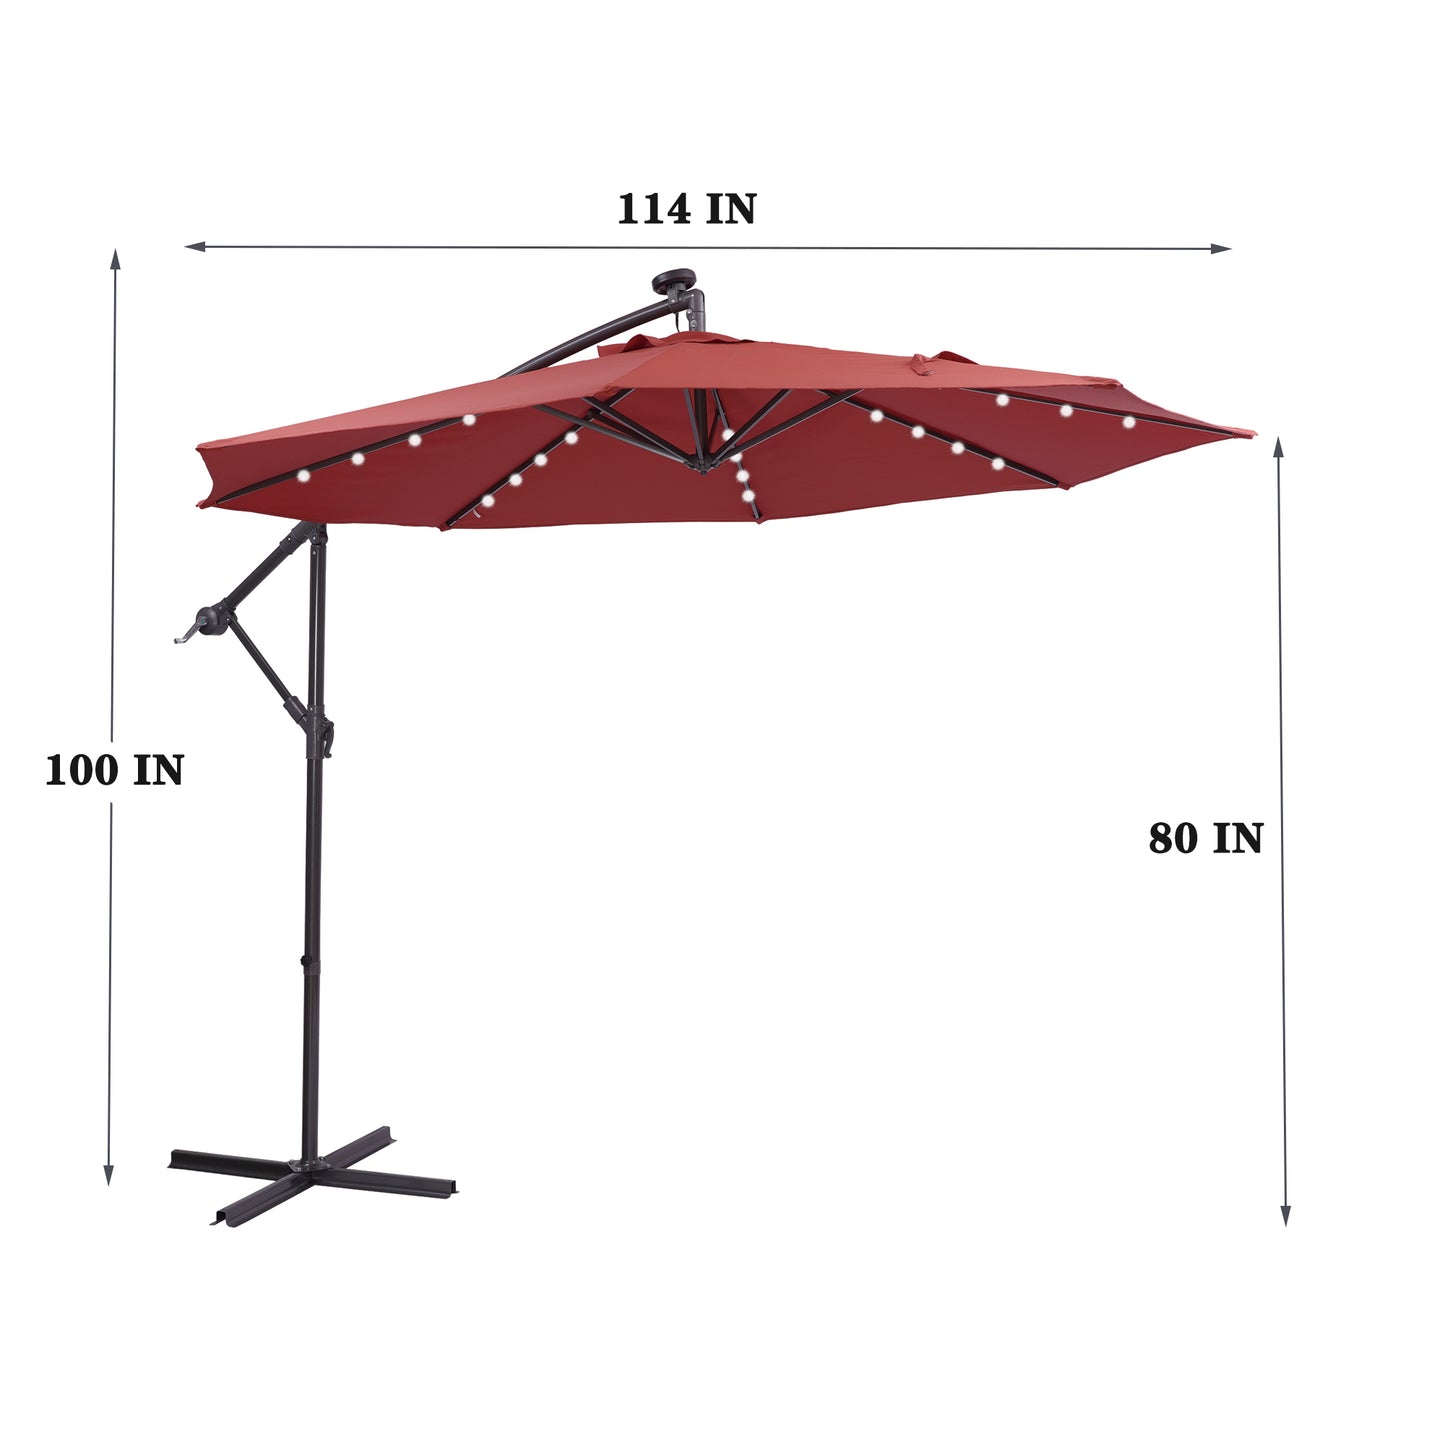 10 FT Solar LED Patio Outdoor Umbrella Hanging Cantilever Umbrella Offset Umbrella Easy Open Adustment with 32 LED Lights